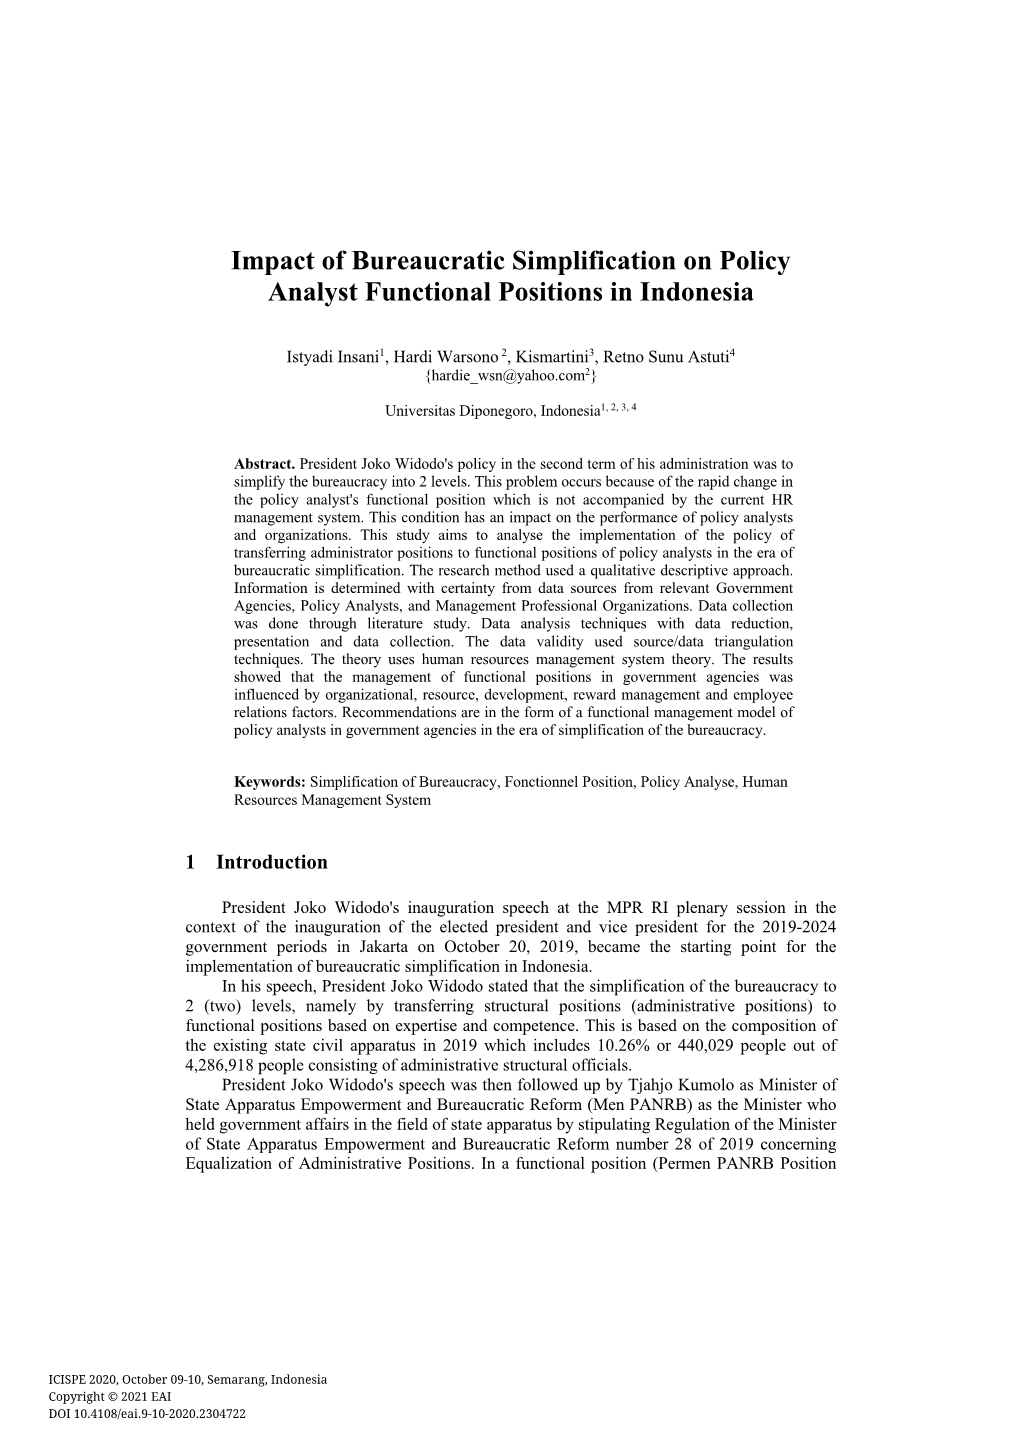 Impact of Bureaucratic Simplification on Policy Analyst Functional Positions in Indonesia